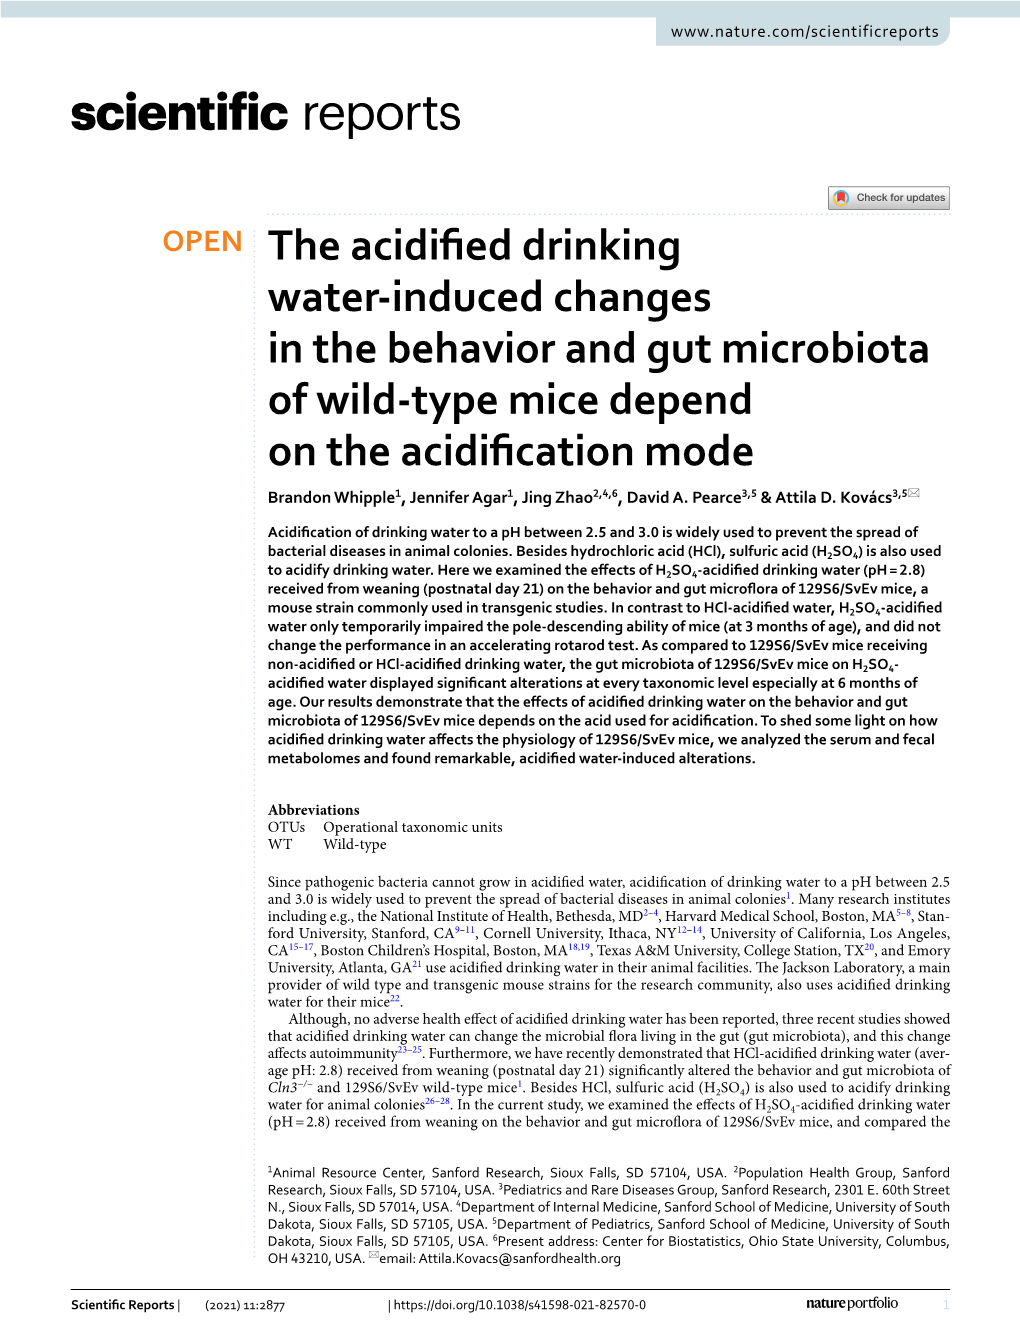 The Acidified Drinking Water-Induced Changes in the Behavior and Gut